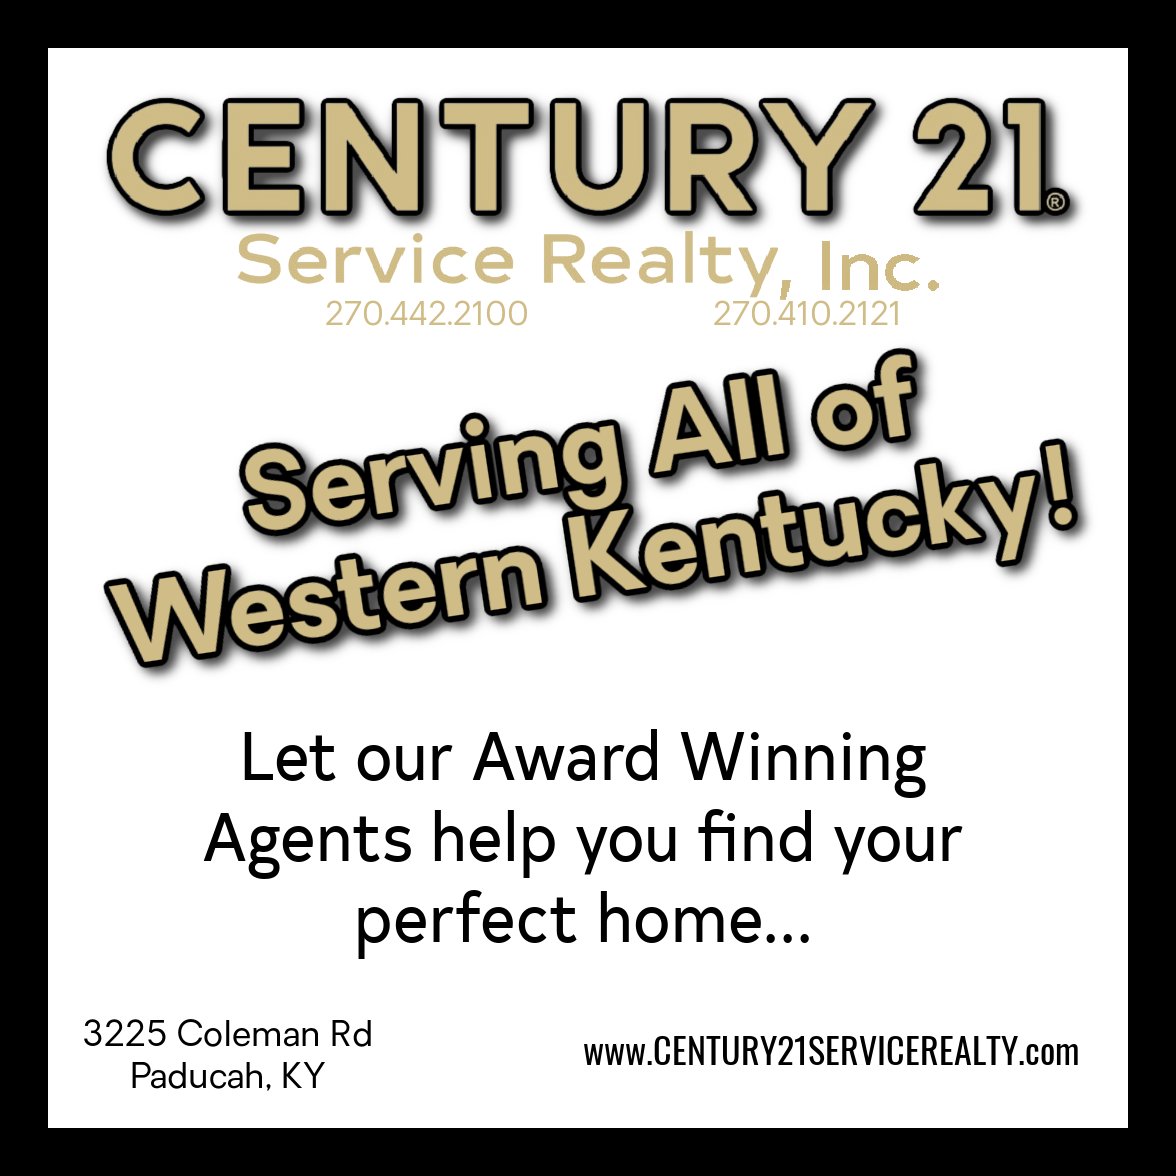 Our experienced agents are ready to serve YOU!

#realtor #realestate #paducahrealestate #westkentuckyrealestate #lakesrealestate #4riversrealestate #bentonrealestate #murrayrealestate #mayfieldrealestate #century21 #Century21servicerealty #communityfirst #C21 #C21Service